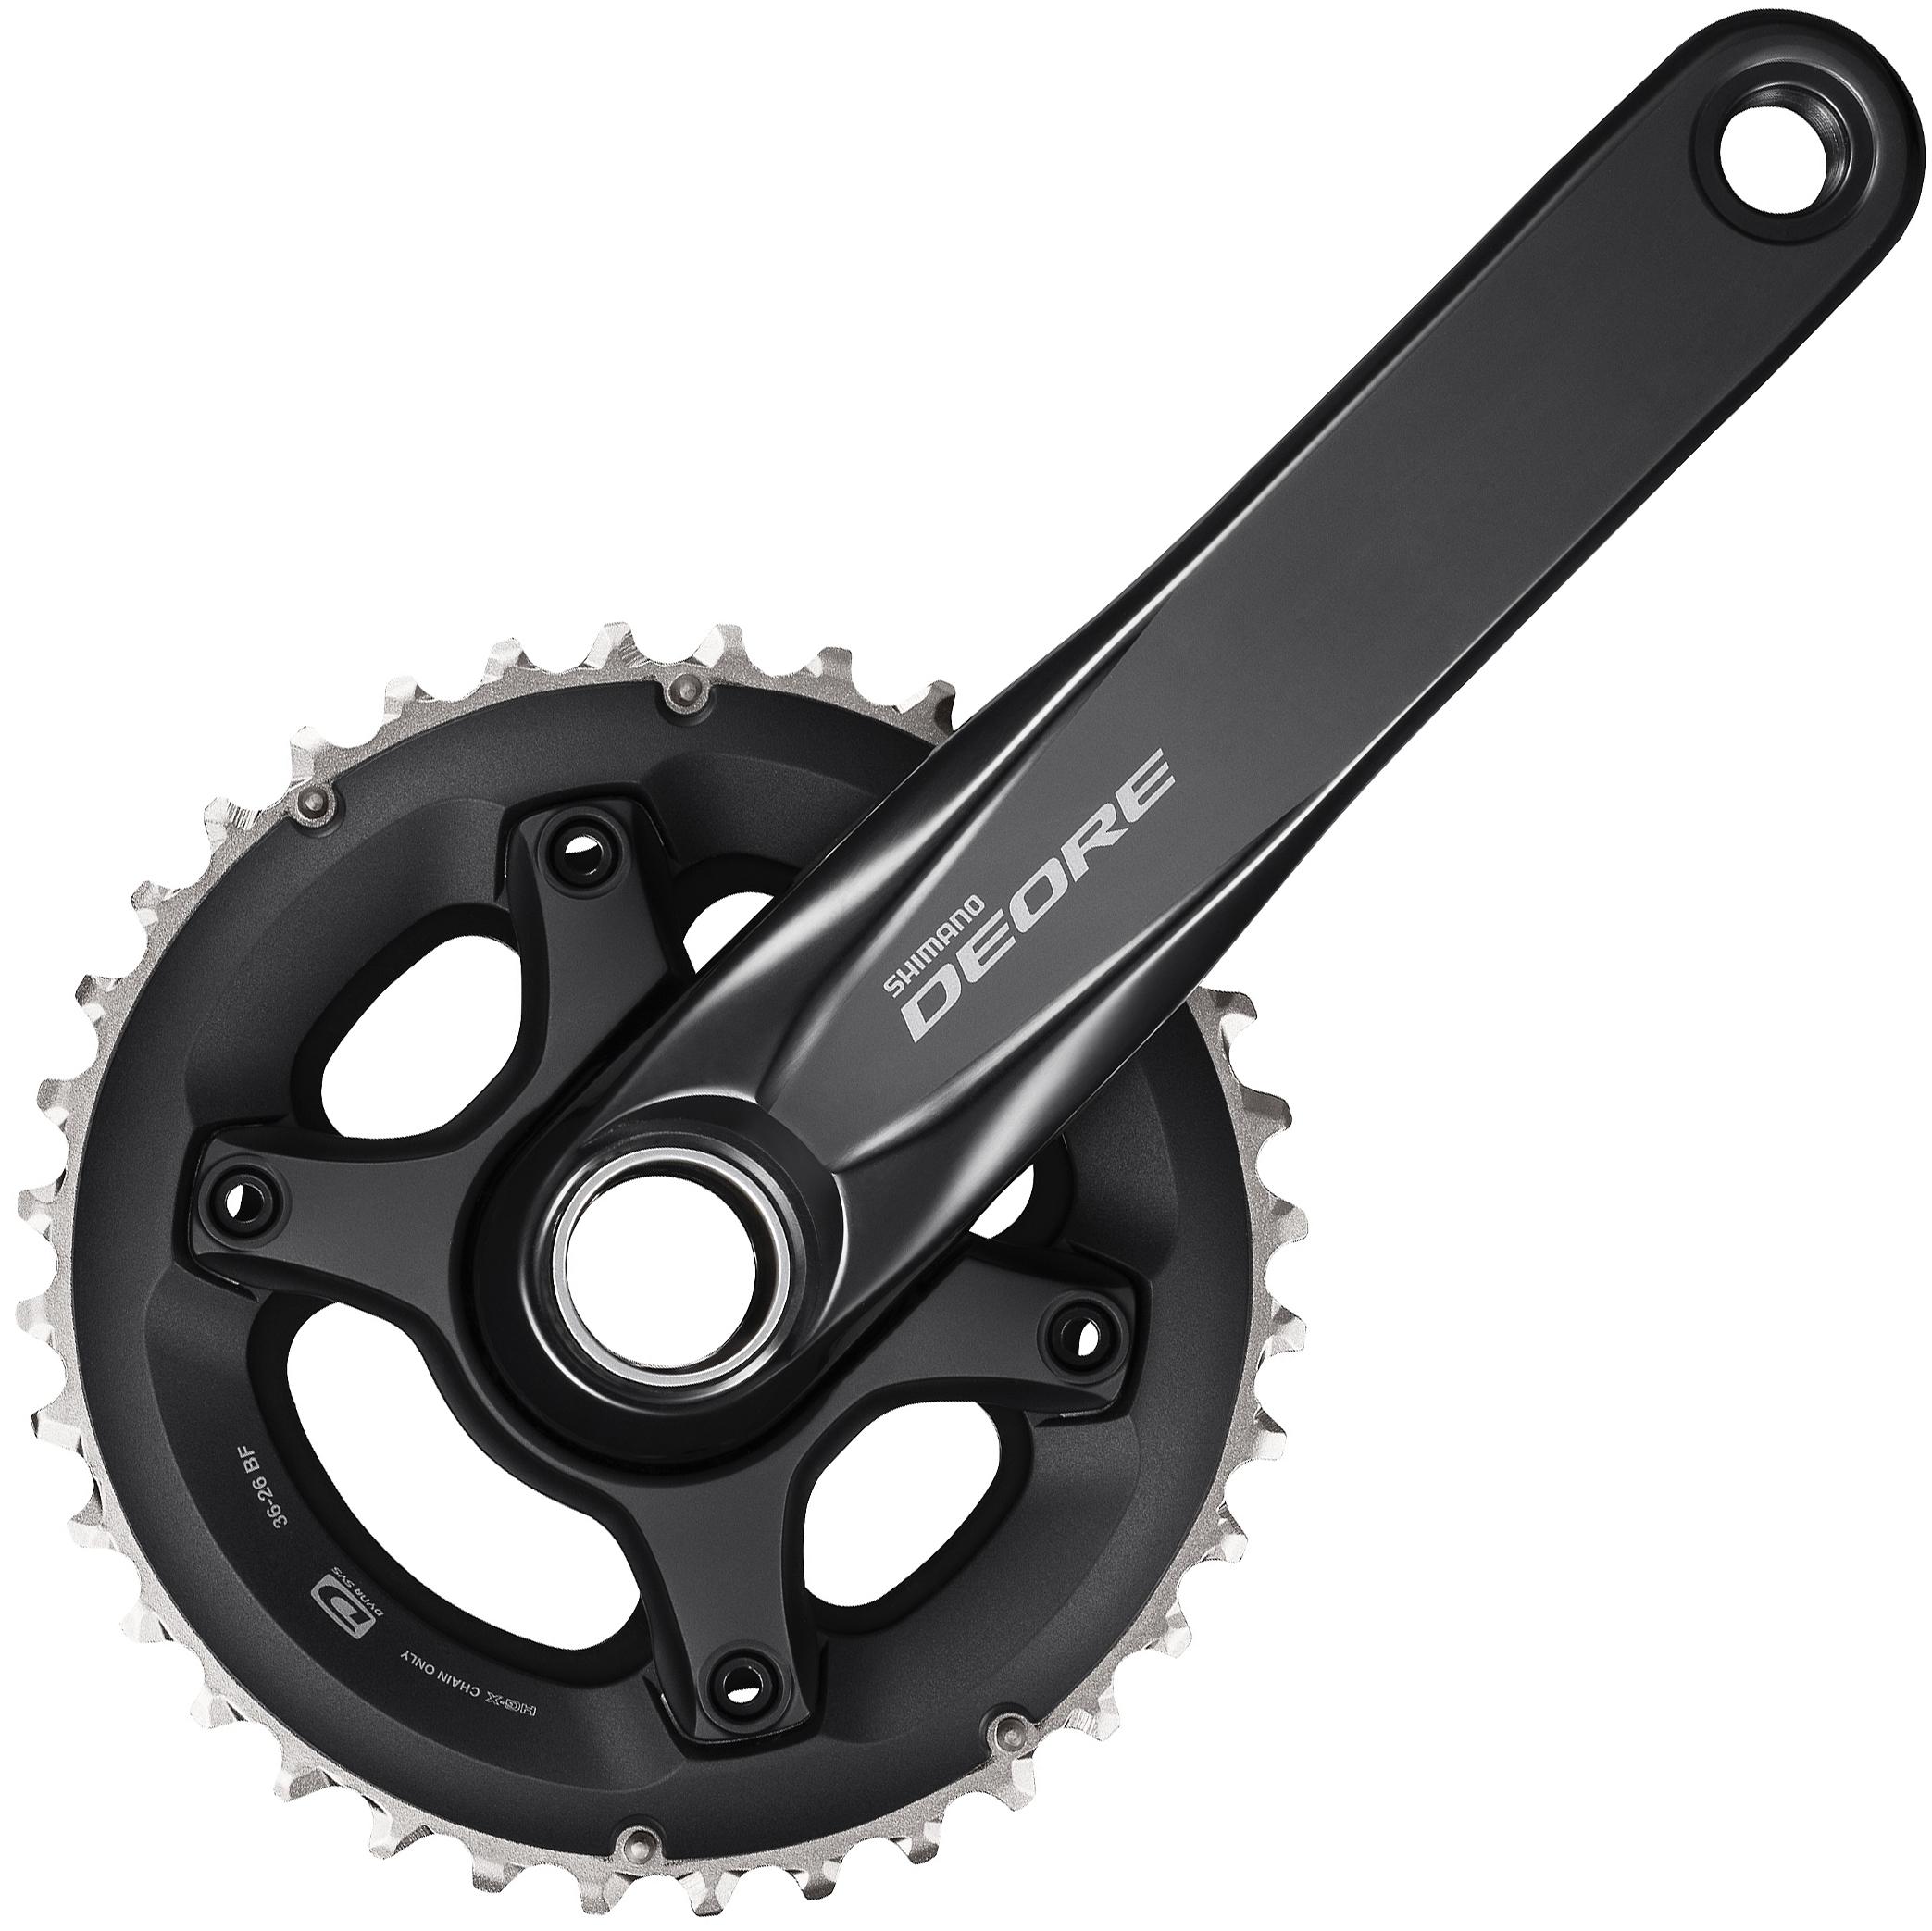 Shimano Deore M6000 10 Speed Boost Double Chainset - Black